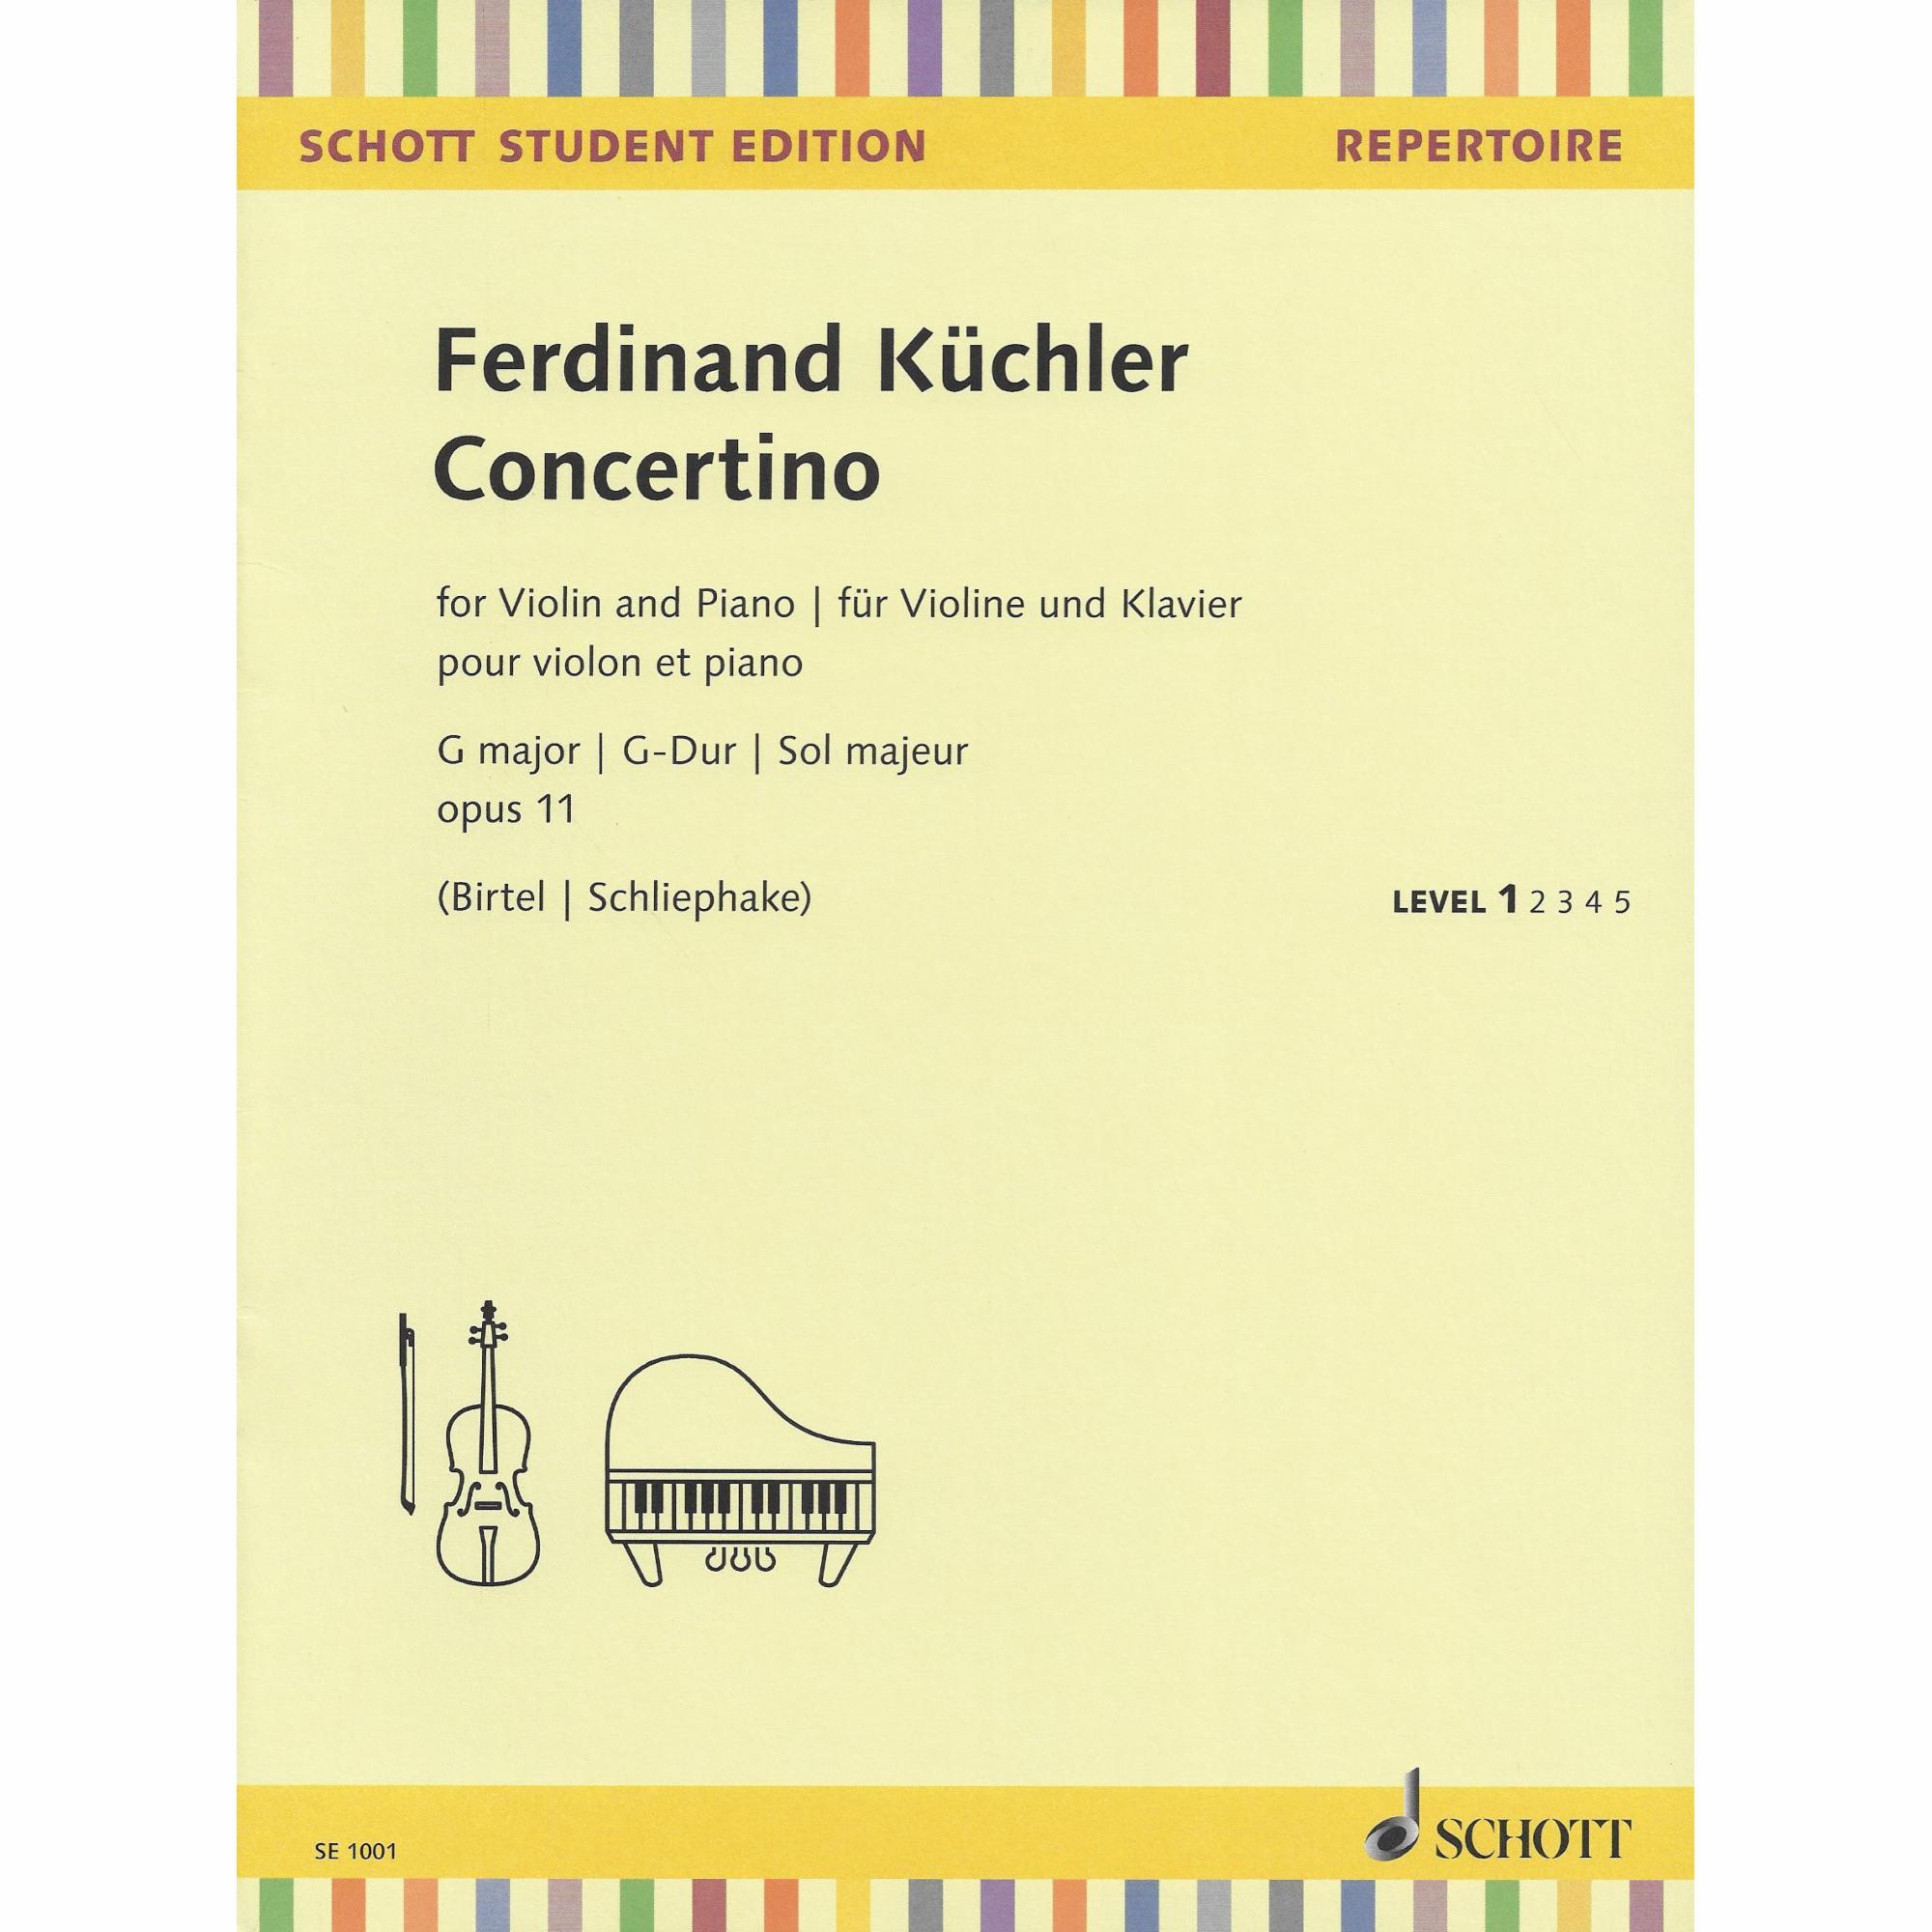 Kuchler -- Concertino in G Major, Op. 11 for Violin and Piano